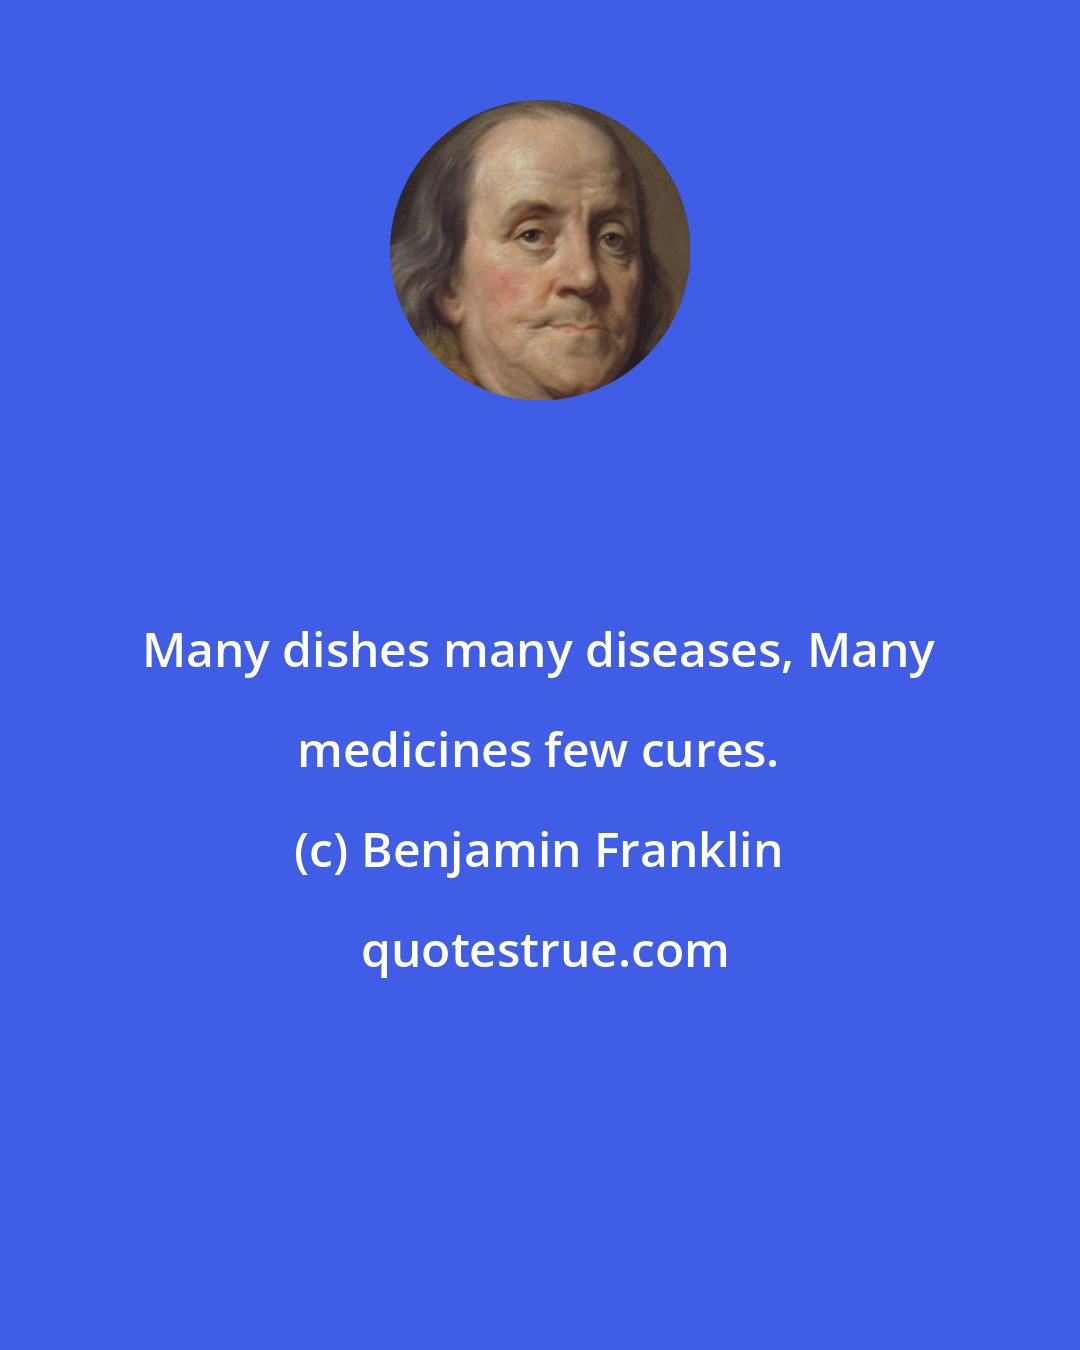 Benjamin Franklin: Many dishes many diseases, Many medicines few cures.